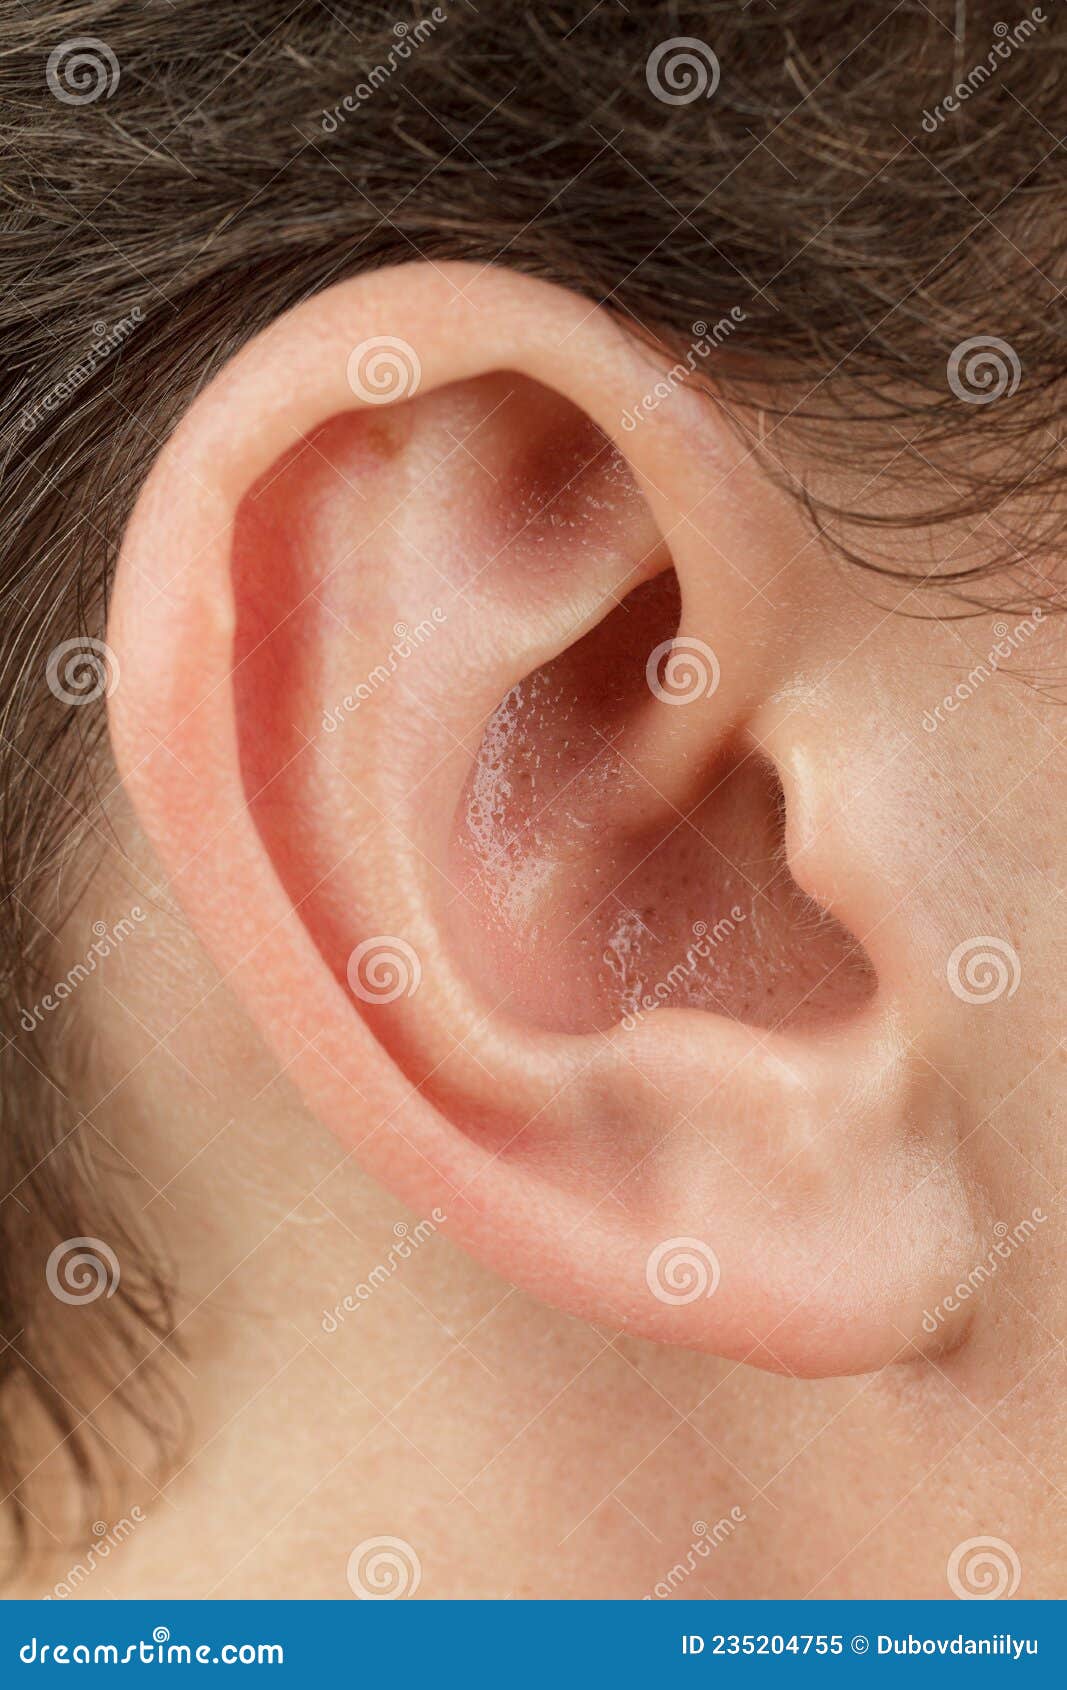 auricle close-up, outer ear, human anatomy hearing aid, ear canal, tragus and antitumor, lobe, selective